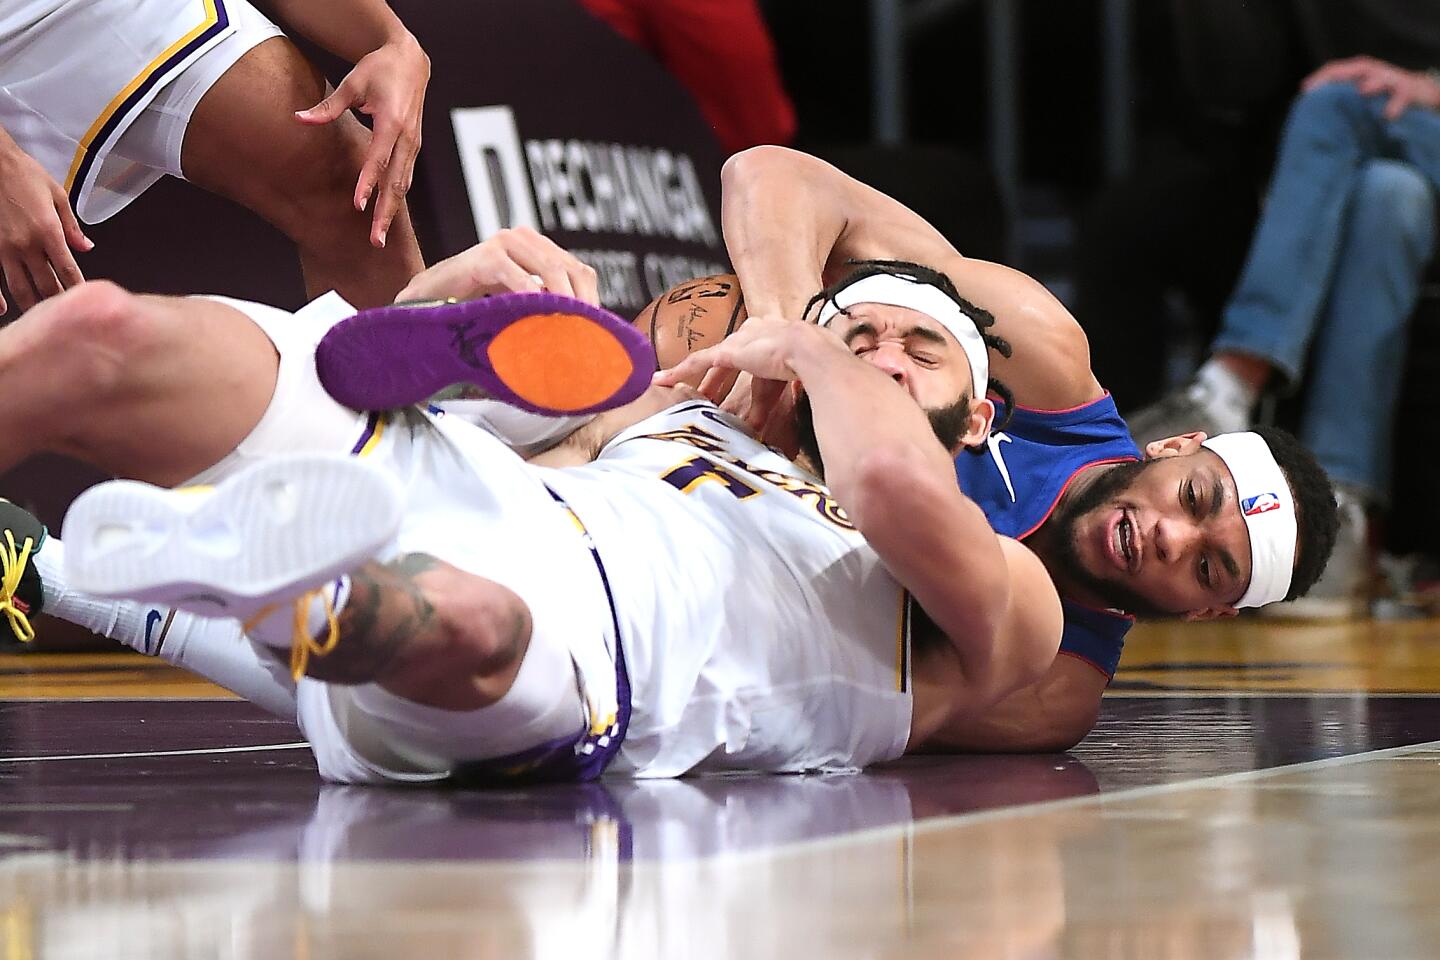 Lakers center JaVale McGee and Detroit Pistons guard Bruce Brown battle for a loose ball during the second quarter.